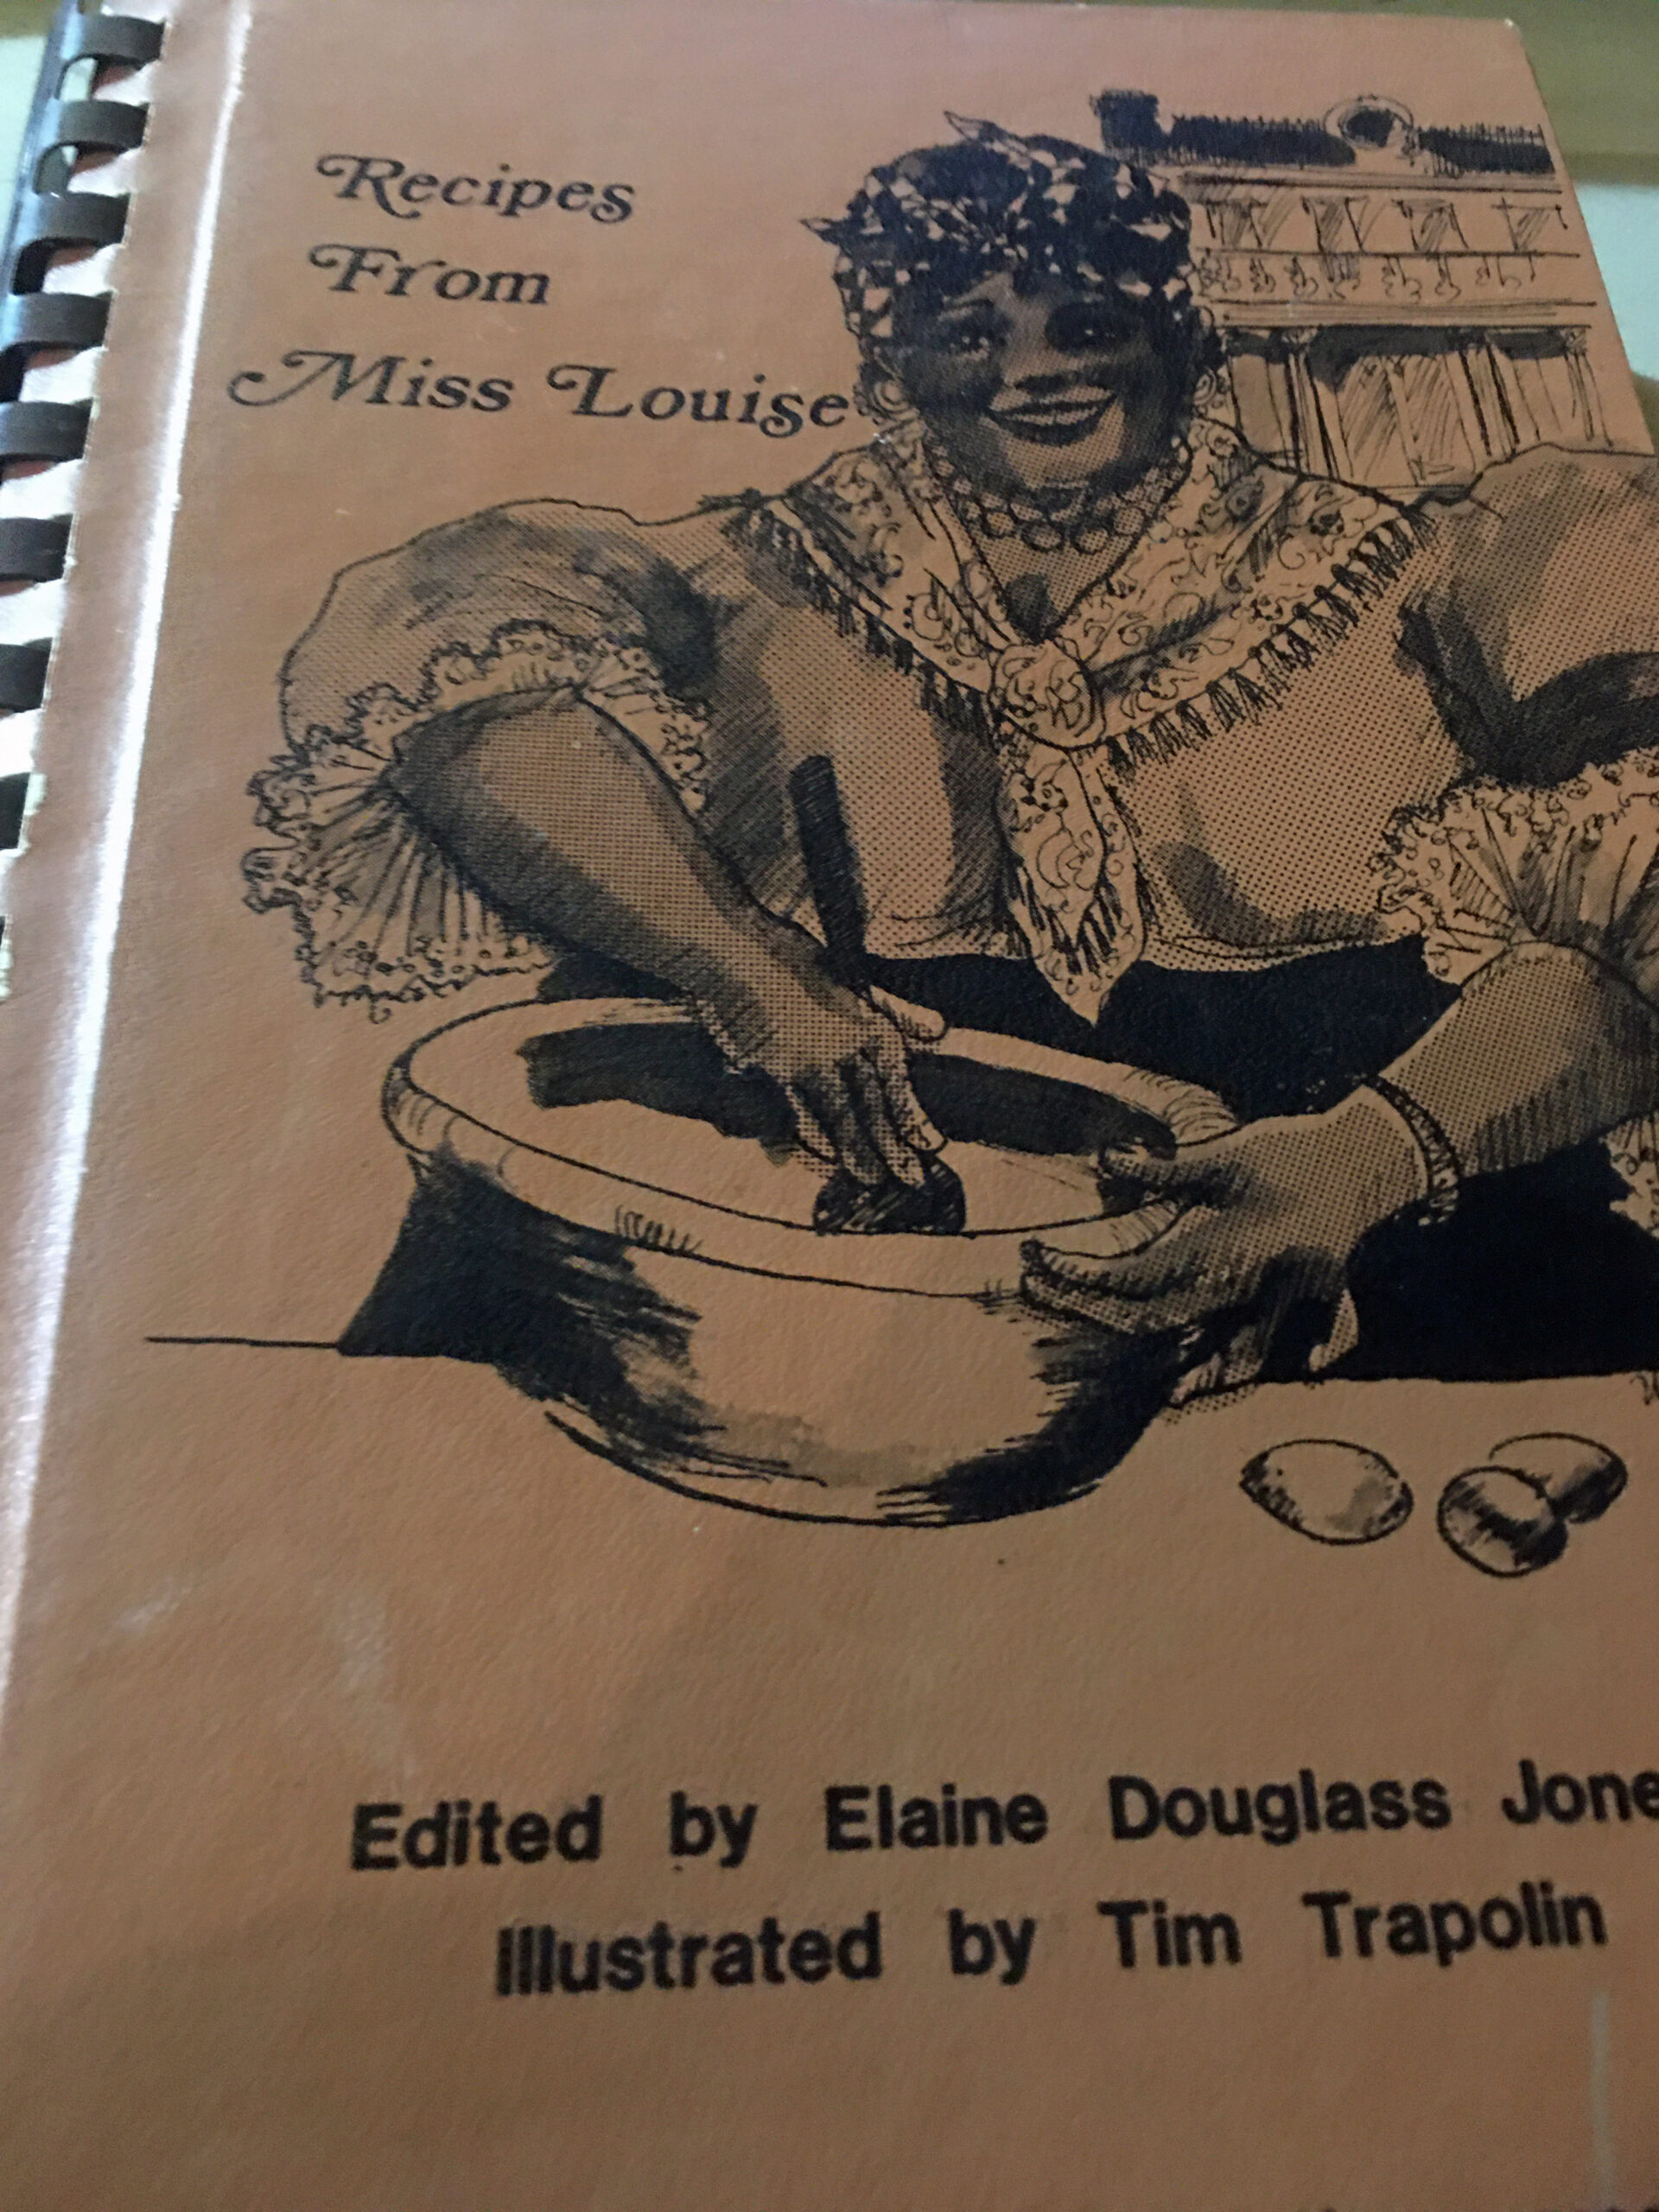 Recipes from Miss Louise, 1978, Louise S. McGehee School, New Orleans, La.  Mint Condition. First Edition, First Printing.